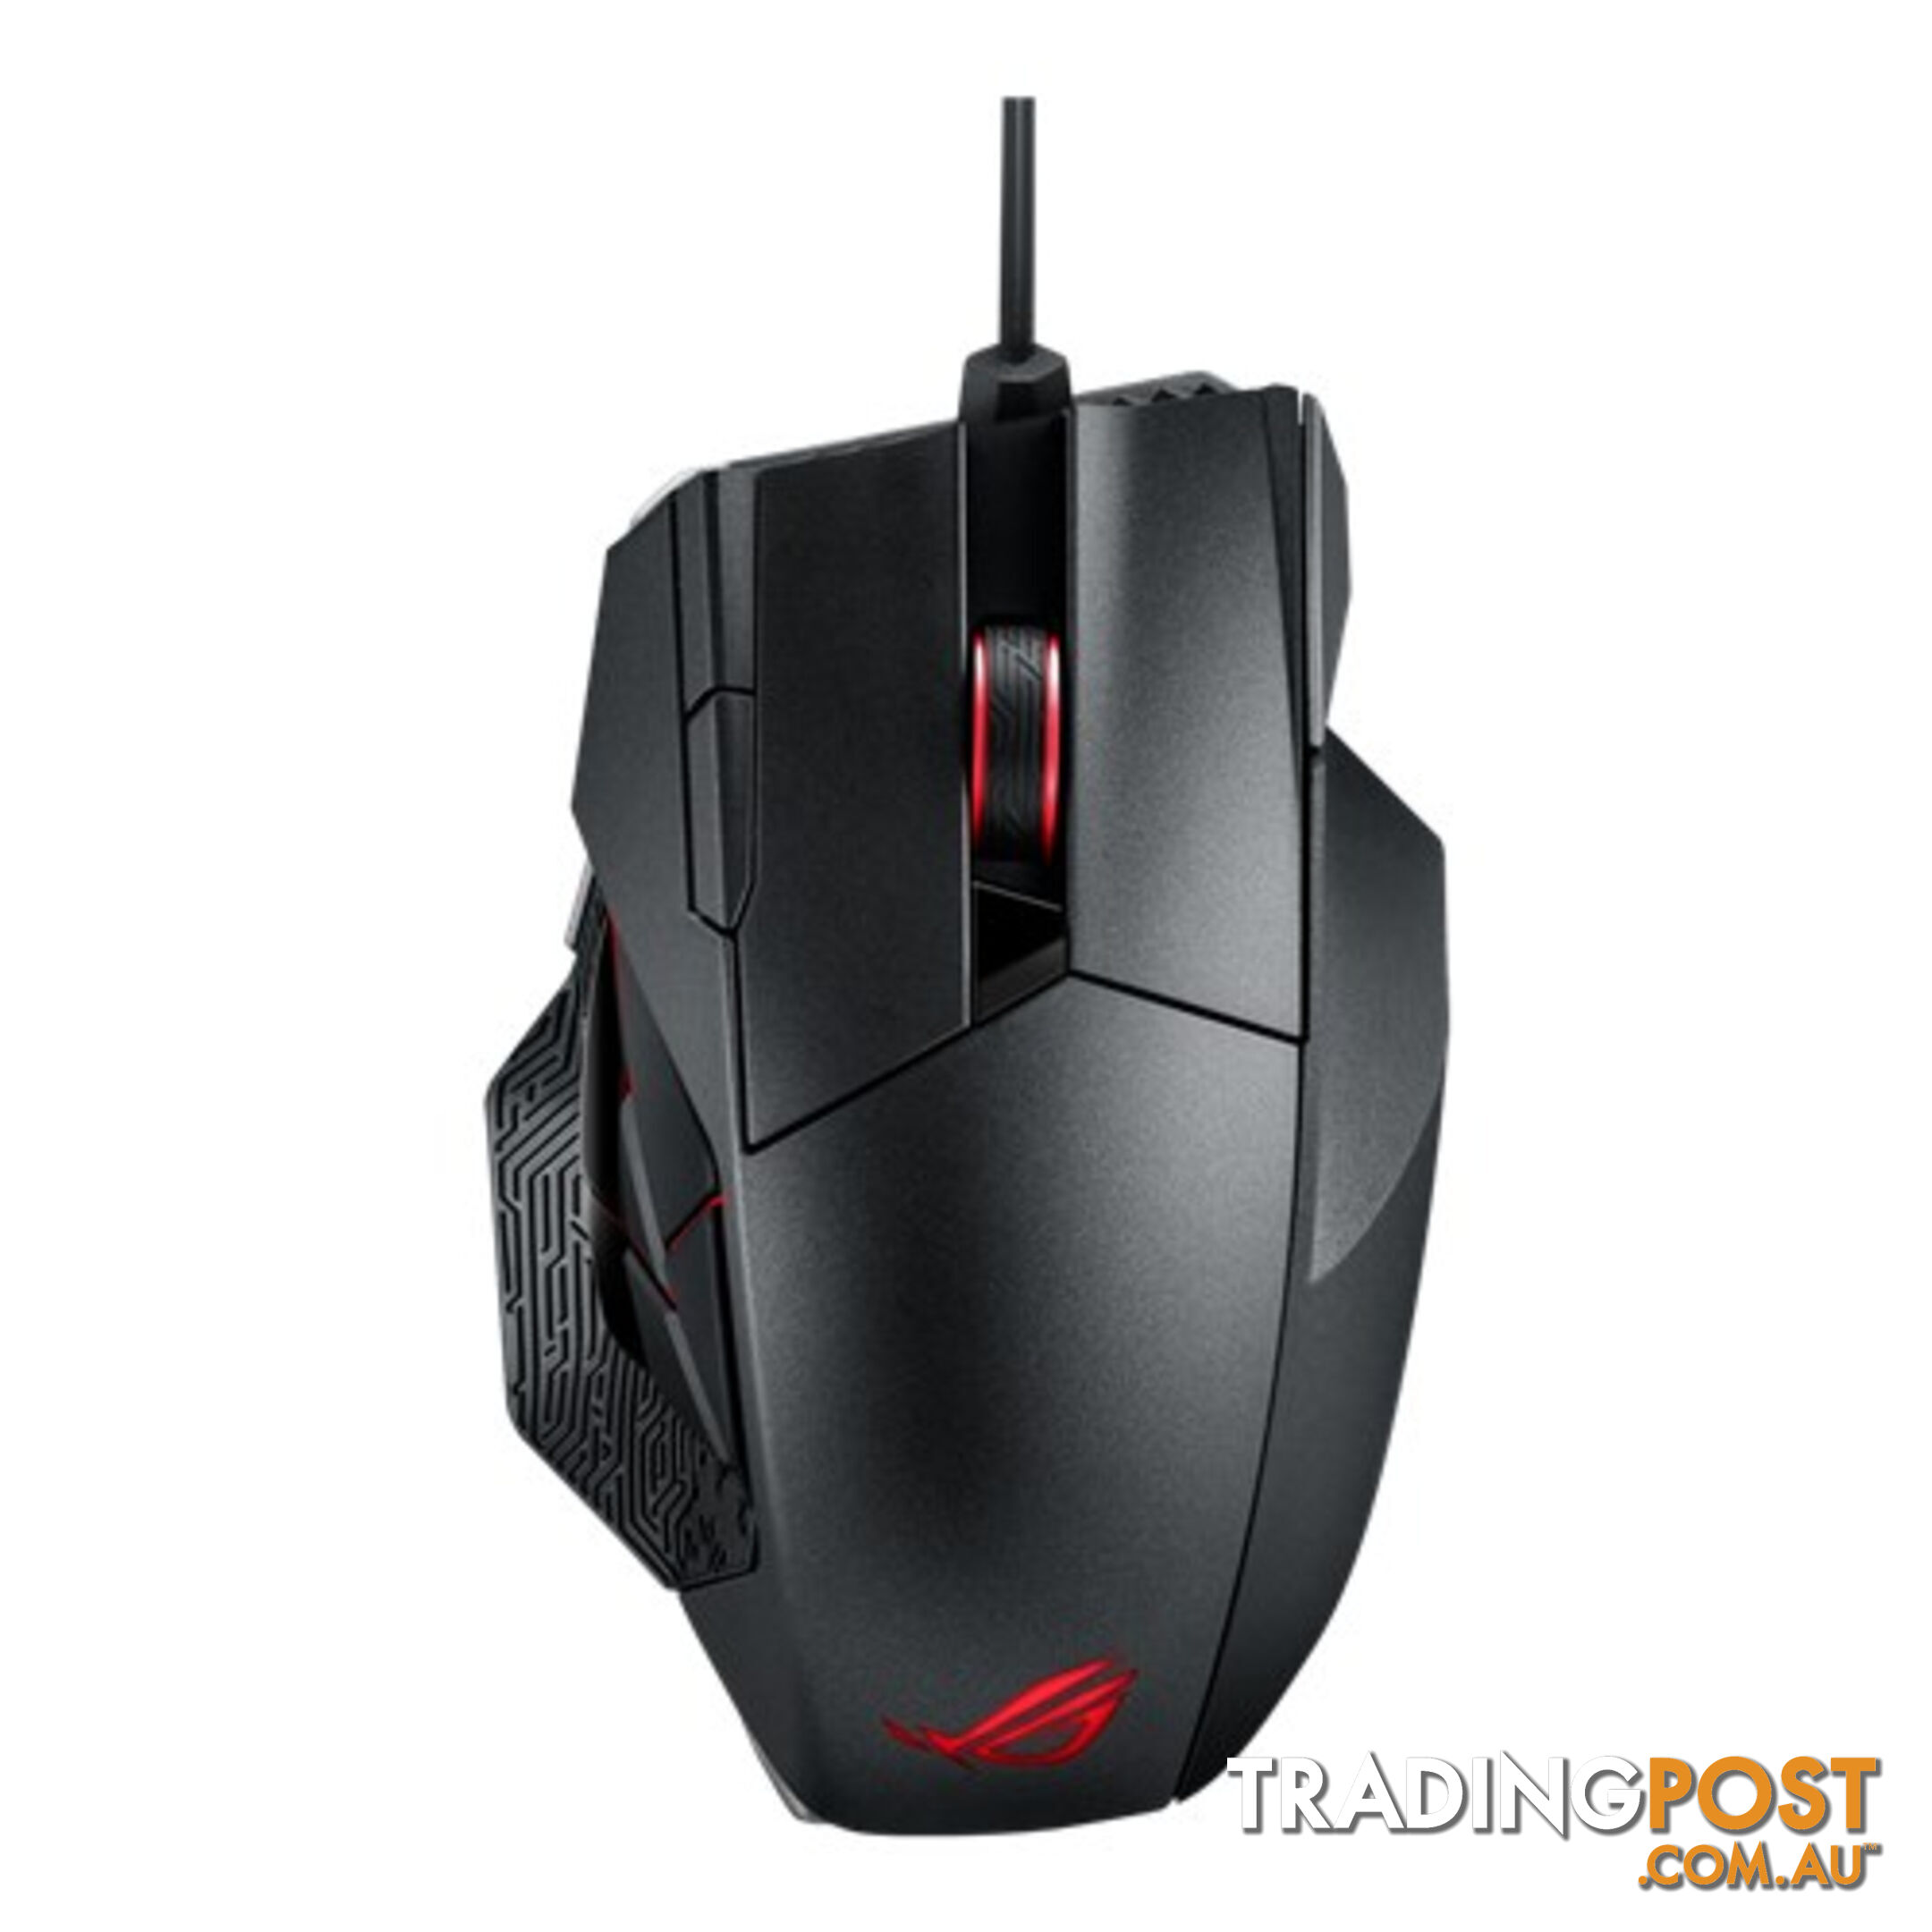 ASUS ROG SPATHA L701-1A Gaming Mouse Complete control for MMO victory - MIA-ROGSPATHA-L701A1